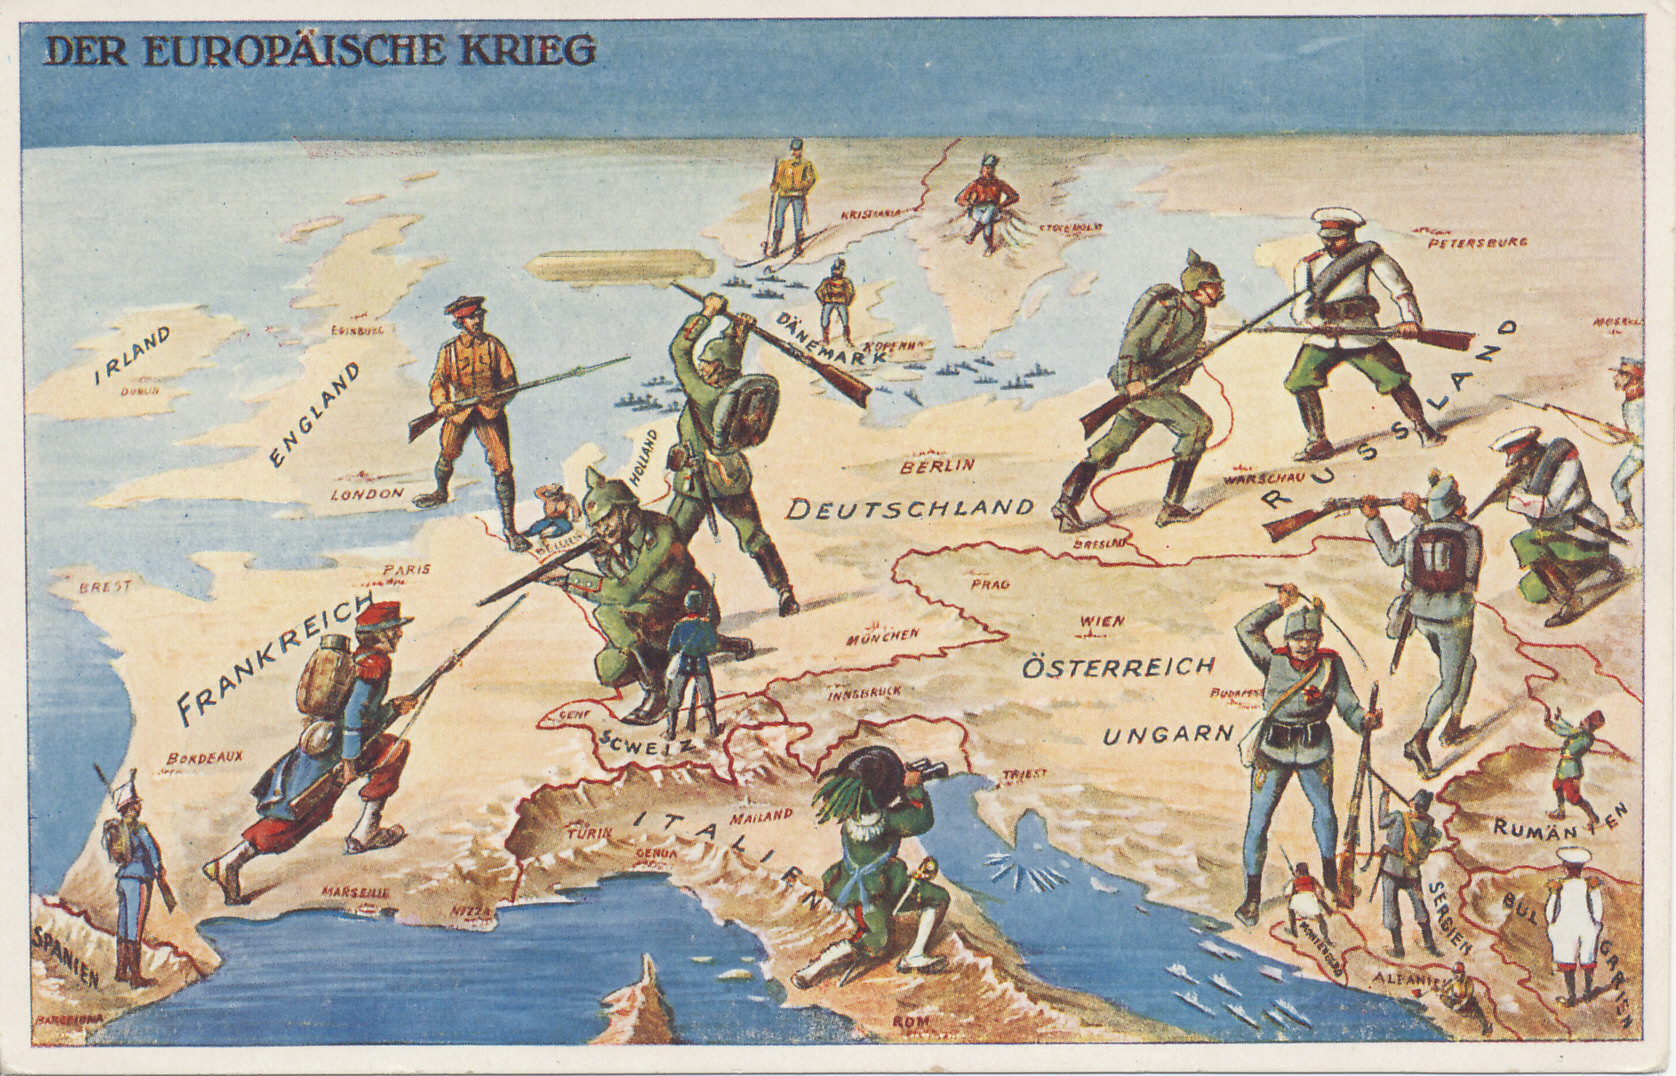 A Swiss postcard of 'The European War' in 1914. The Central Powers of Germany and Austria-Hungary face enemies to the east, west, and south. Germany is fighting the war it tried to avoid, battling Russia to the east and France to the west. Germany had also hoped to avoid fighting England which came to the aid of neutral (and prostrate) Belgium, and straddles the Channel. Austria-Hungary also fights on two fronts, against Russia to the east and Serbia and Montenegro to the south. Italy, the third member of the Triple Alliance with Germany and Austria-Hungary, declared neutrality, and looks on. Other neutral nations include Spain, Norway, Sweden, Denmark, Switzerland, Romania, Bulgaria, and Albania. Japan enters from the east to battle Germany. The German Fleet stays close to port in the North and Baltic Seas while a German Zeppelin targets England. The Austro-Hungarian Fleet keeps watch in the Adriatic. Turkey is not represented, and entered the war at the end of October, 1914; Italy in late May, 1915.
Text:
Der Europäische Krieg
The European War